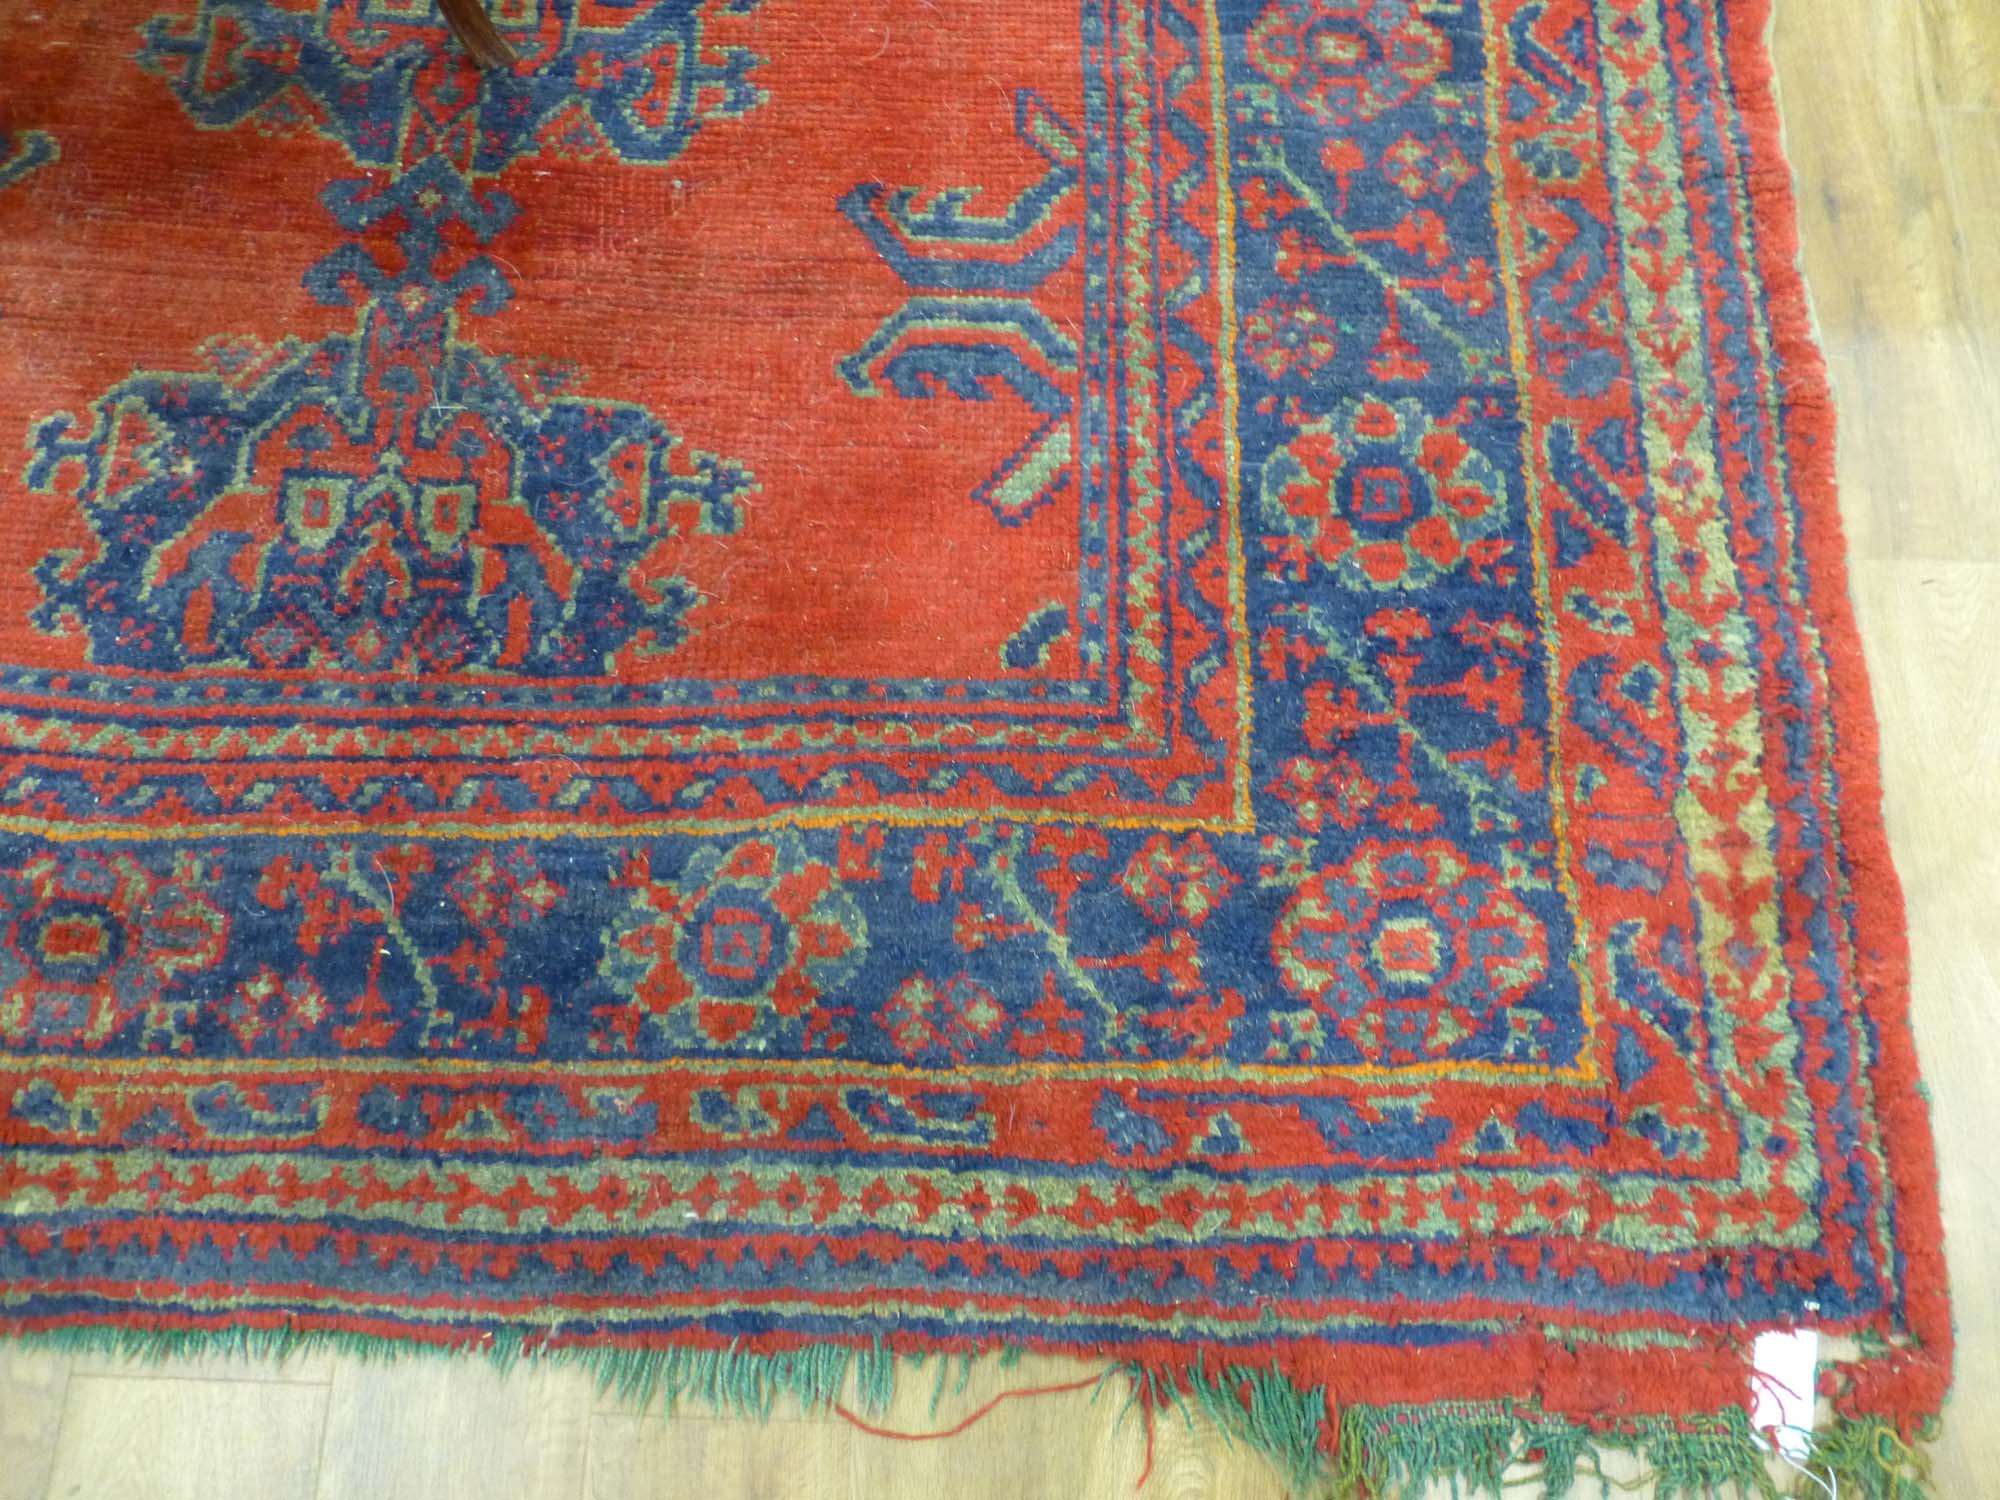 An early 20th century red ground rug with repeated motifs within red and blue bands,